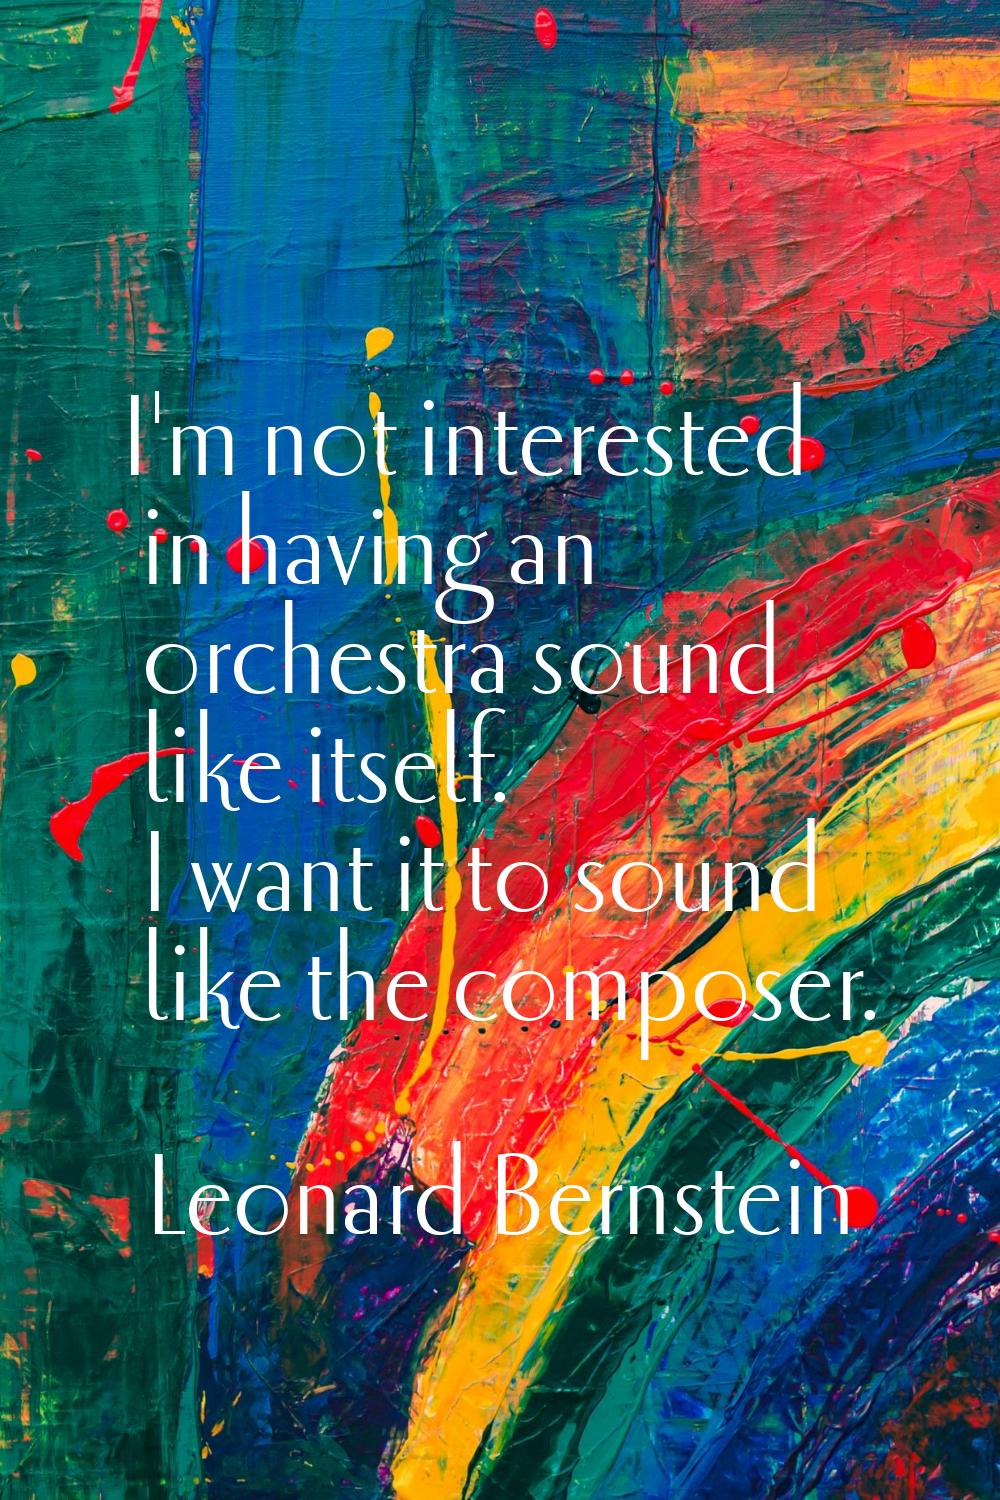 I'm not interested in having an orchestra sound like itself. I want it to sound like the composer.